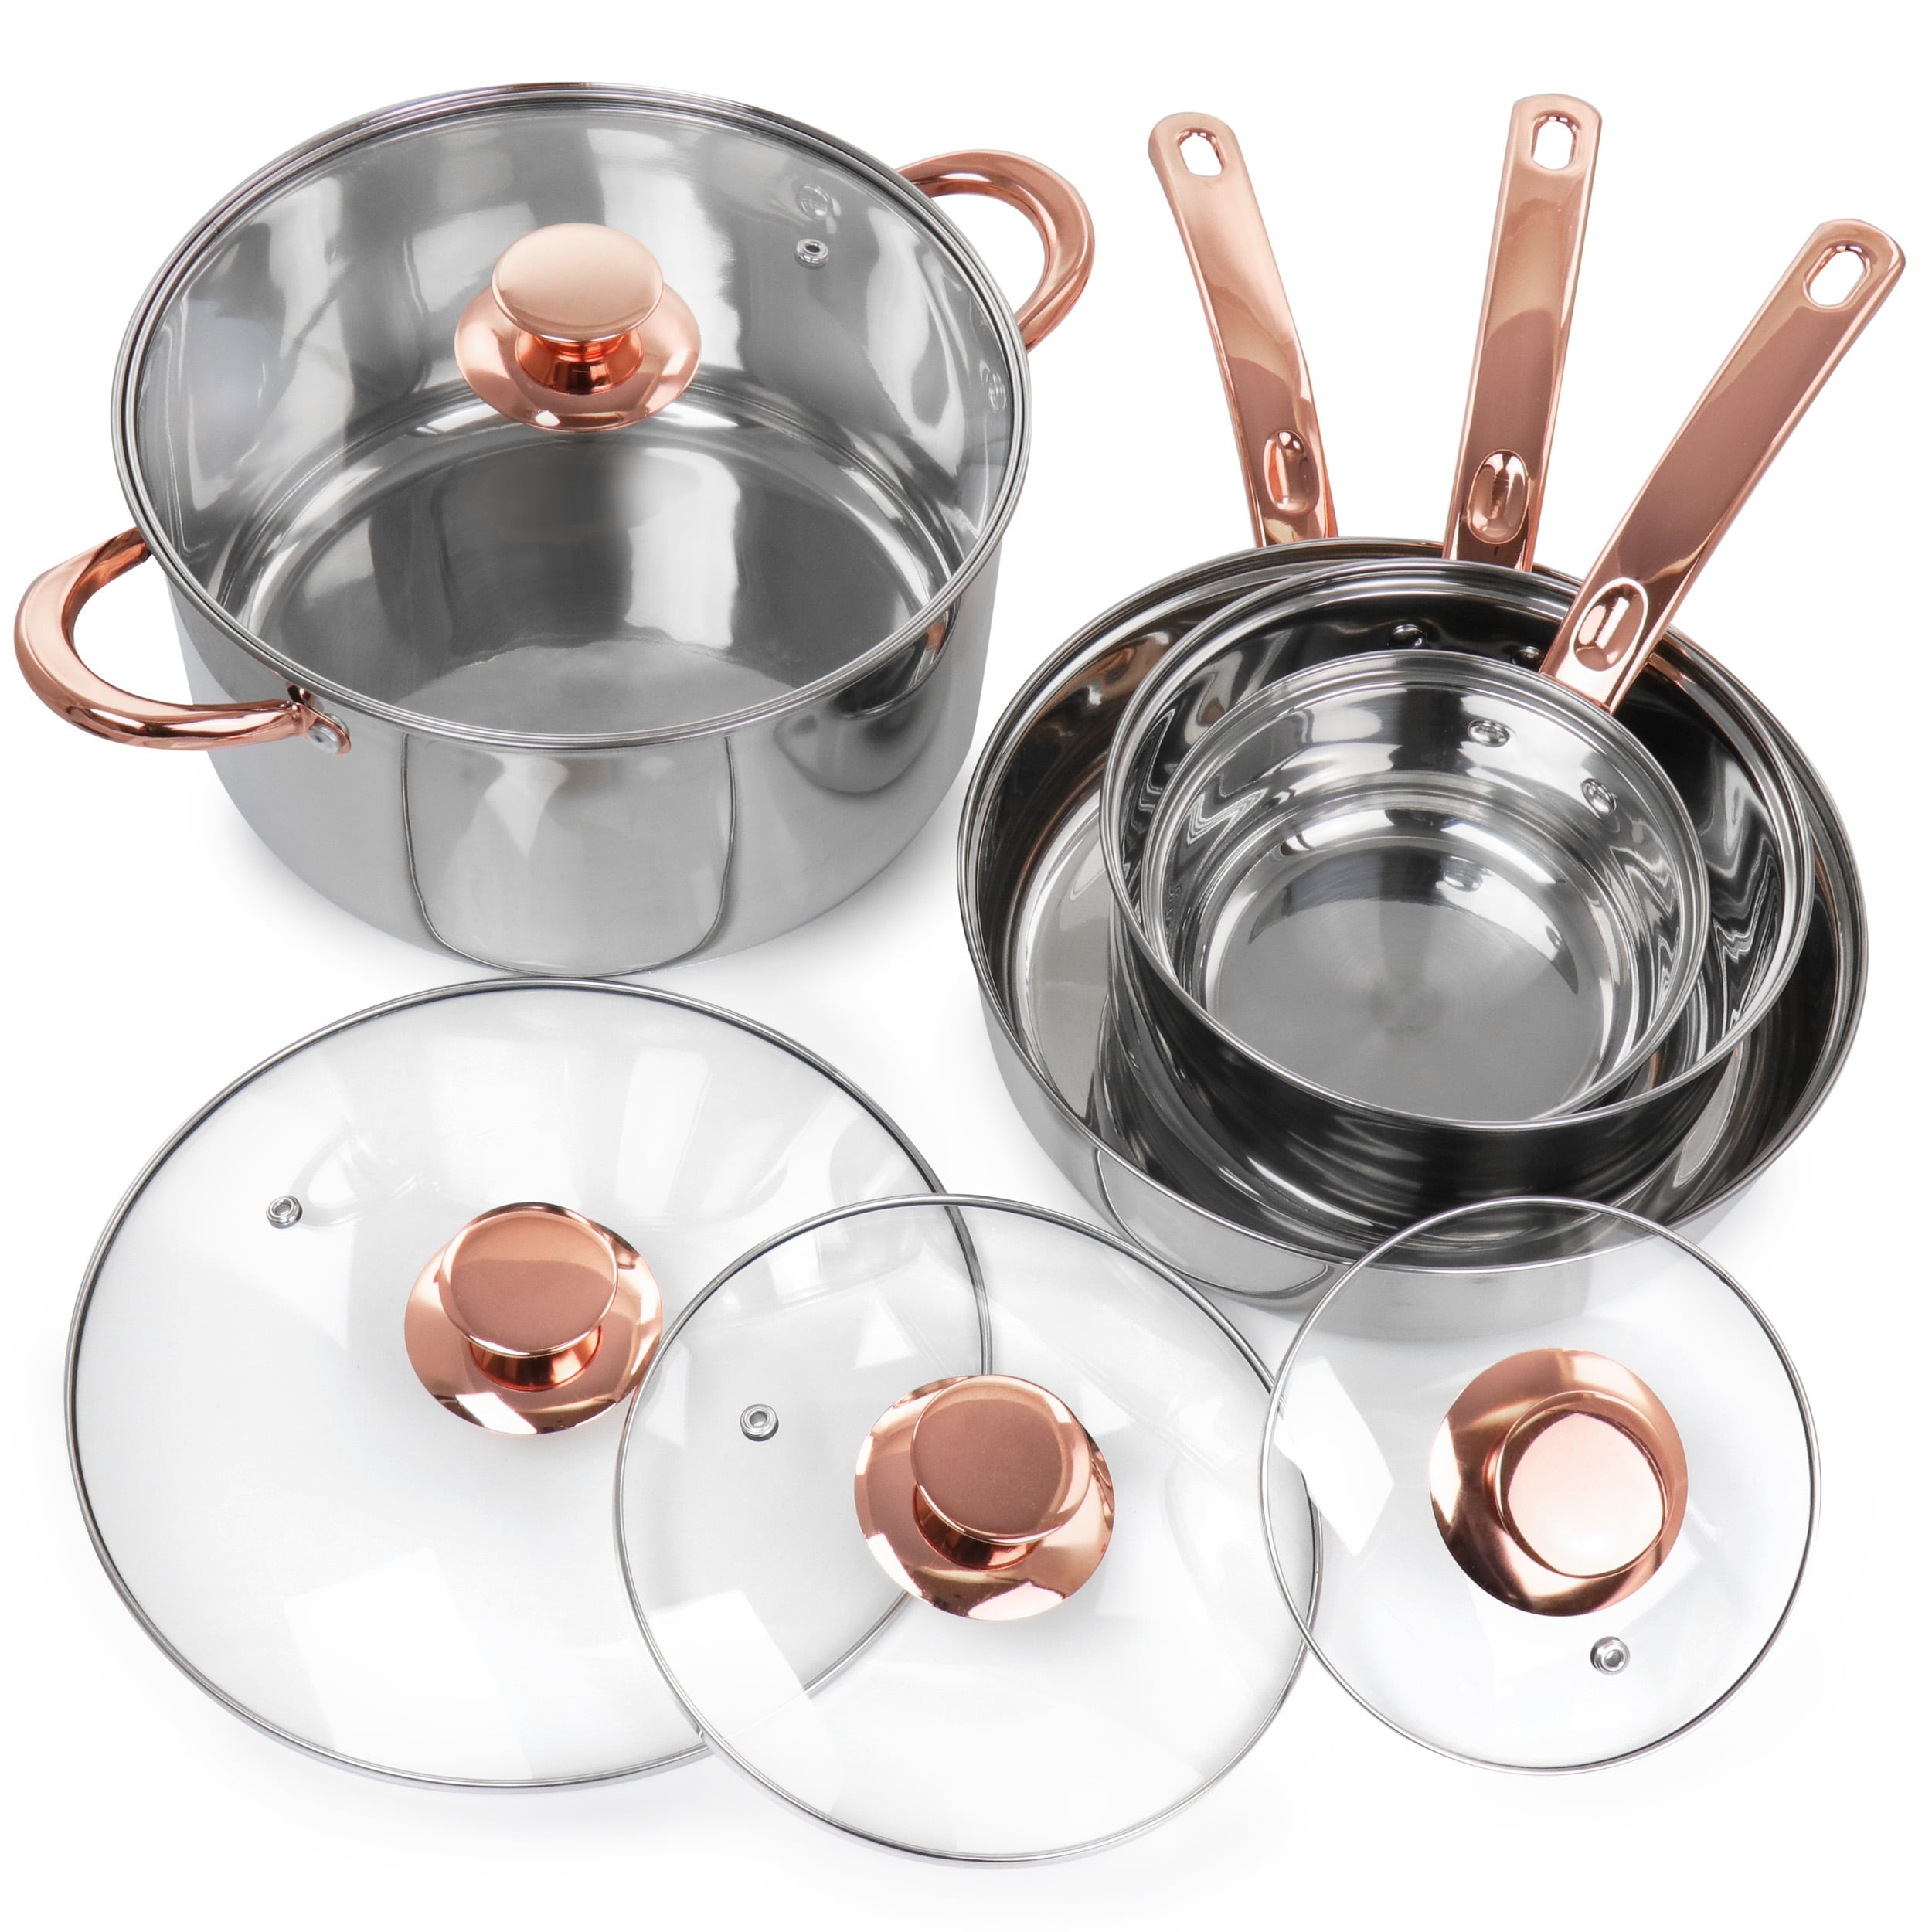 https://ak1.ostkcdn.com/images/products/is/images/direct/a356ff3d897db03da8edbcac28ffec9666e1220d/Gibson-Home-Ansonville-8-Piece-Stainless-Steel-Cookware-Set-with-Rose-Gold-Handles.jpg